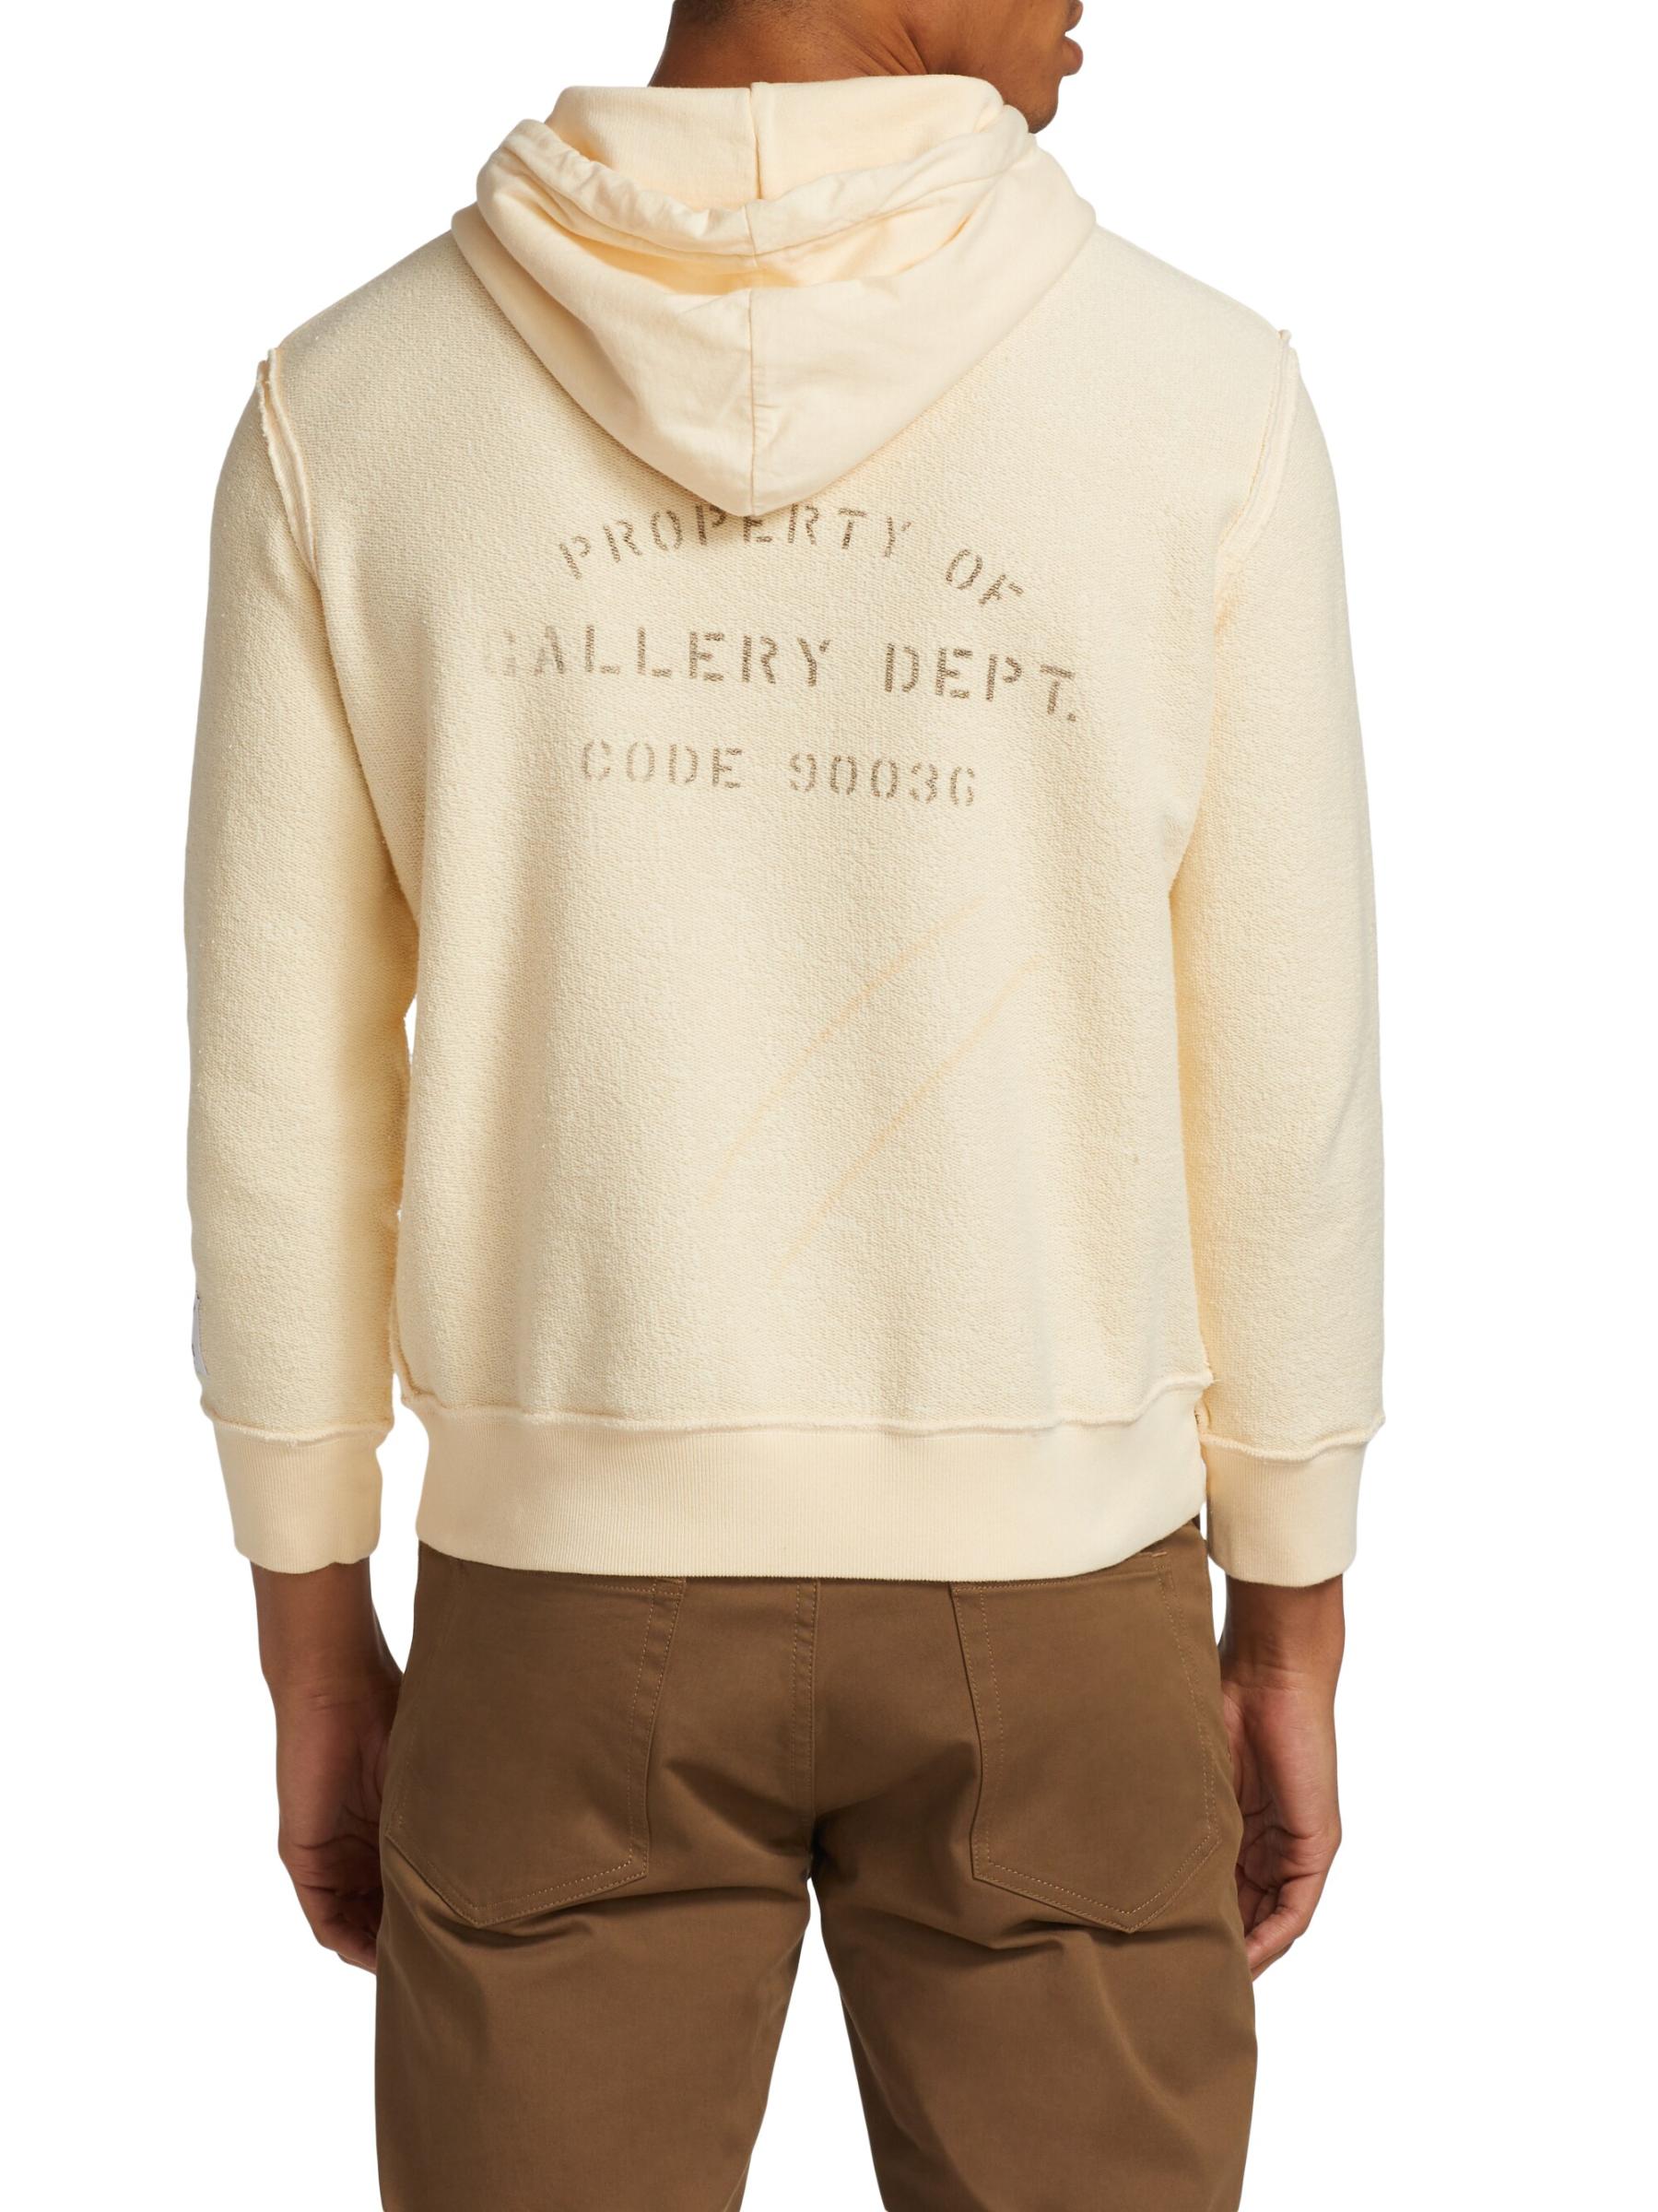 The Impact of Collaborations on the Gallery Dept Hoodie’s Popularity and Collectability插图